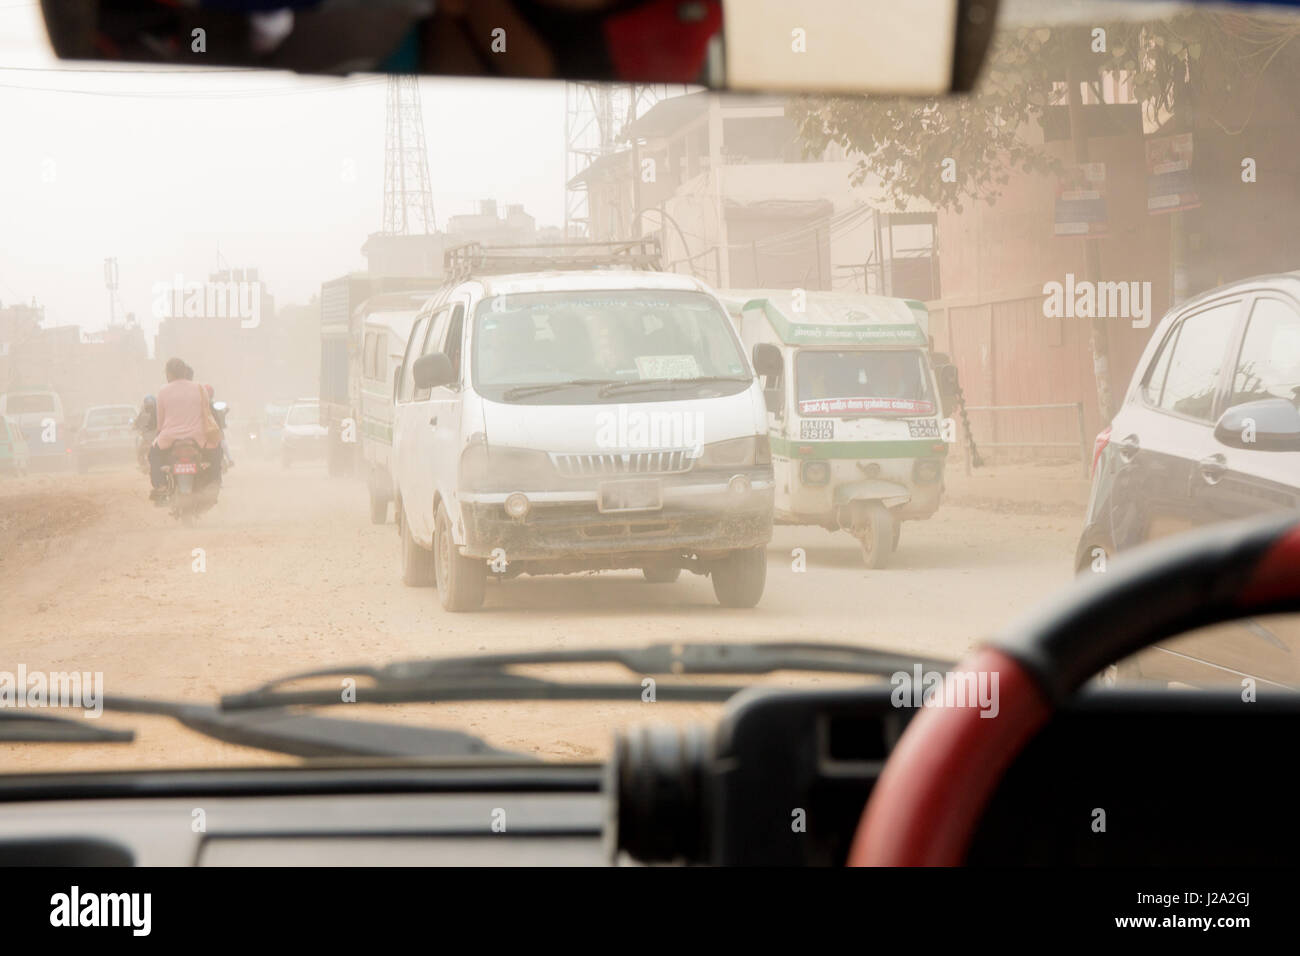 Traffic rushes through an extremely dusty and polluted i street in Kathmandu, Nepal. Shot from the inside of a small taxi car. Stock Photo